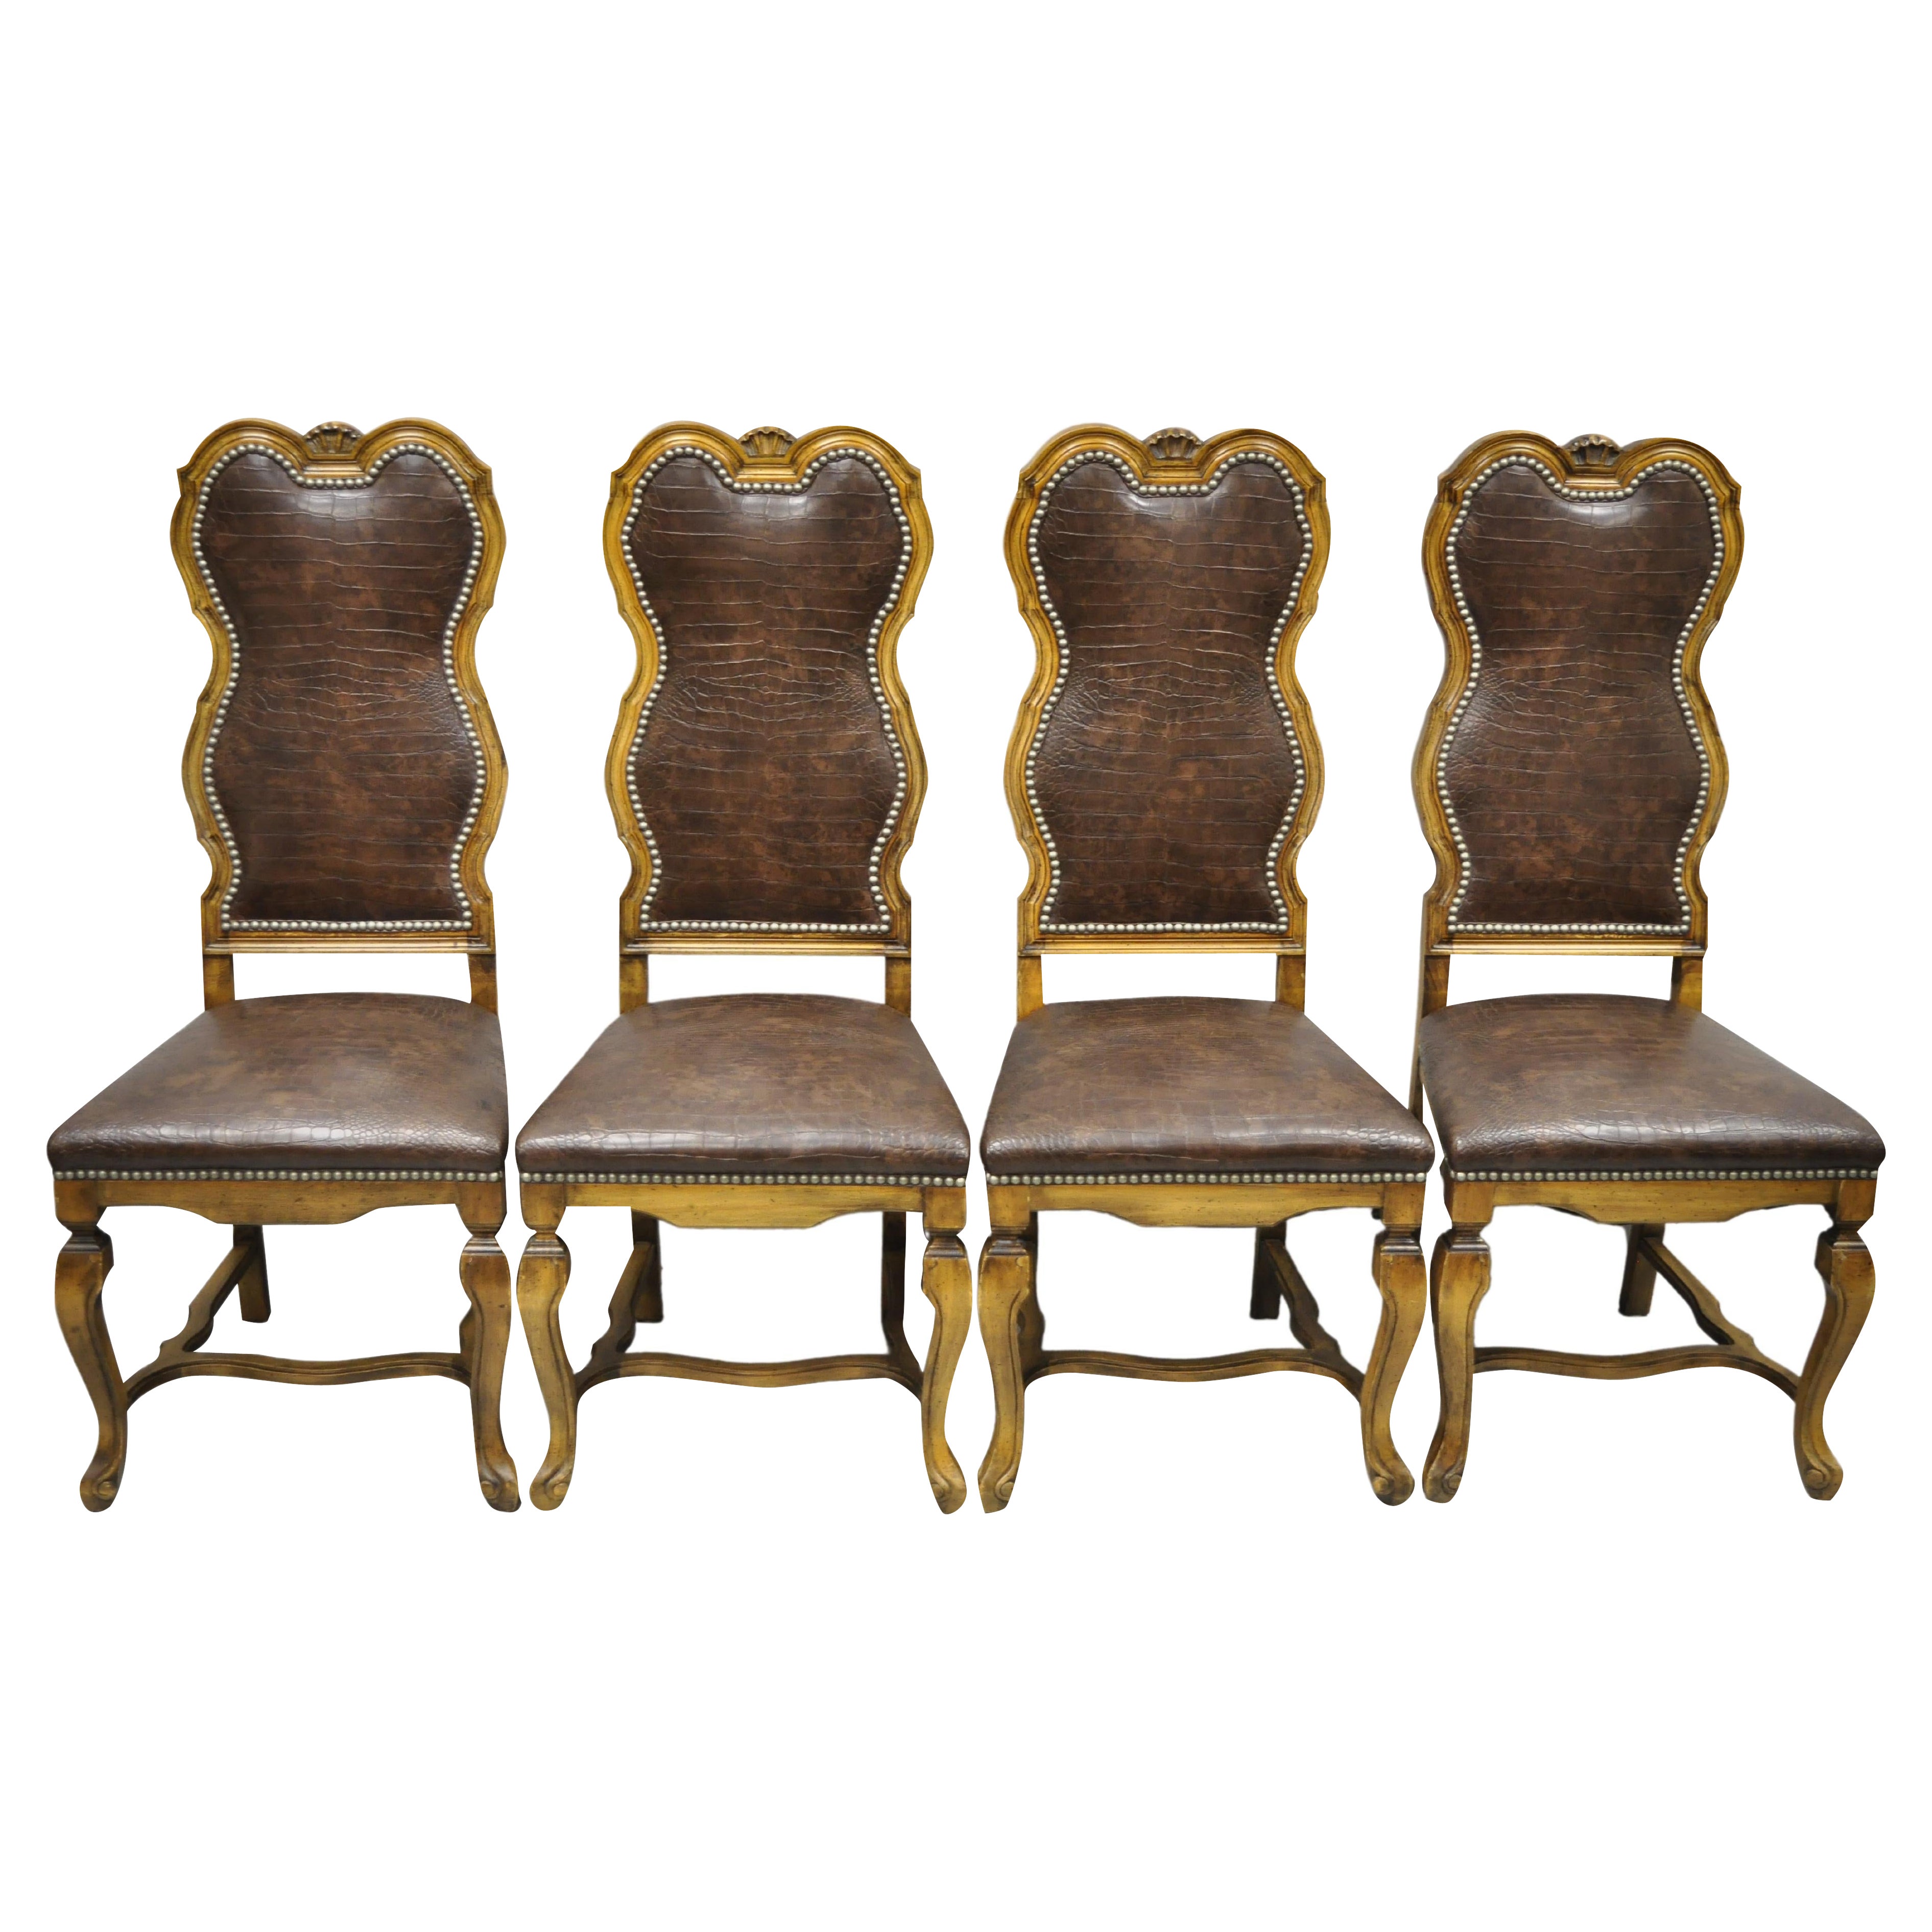 Italian Baroque Rococo Carved Wood Brown Reptile Print Dining Chairs, Set of 4 For Sale